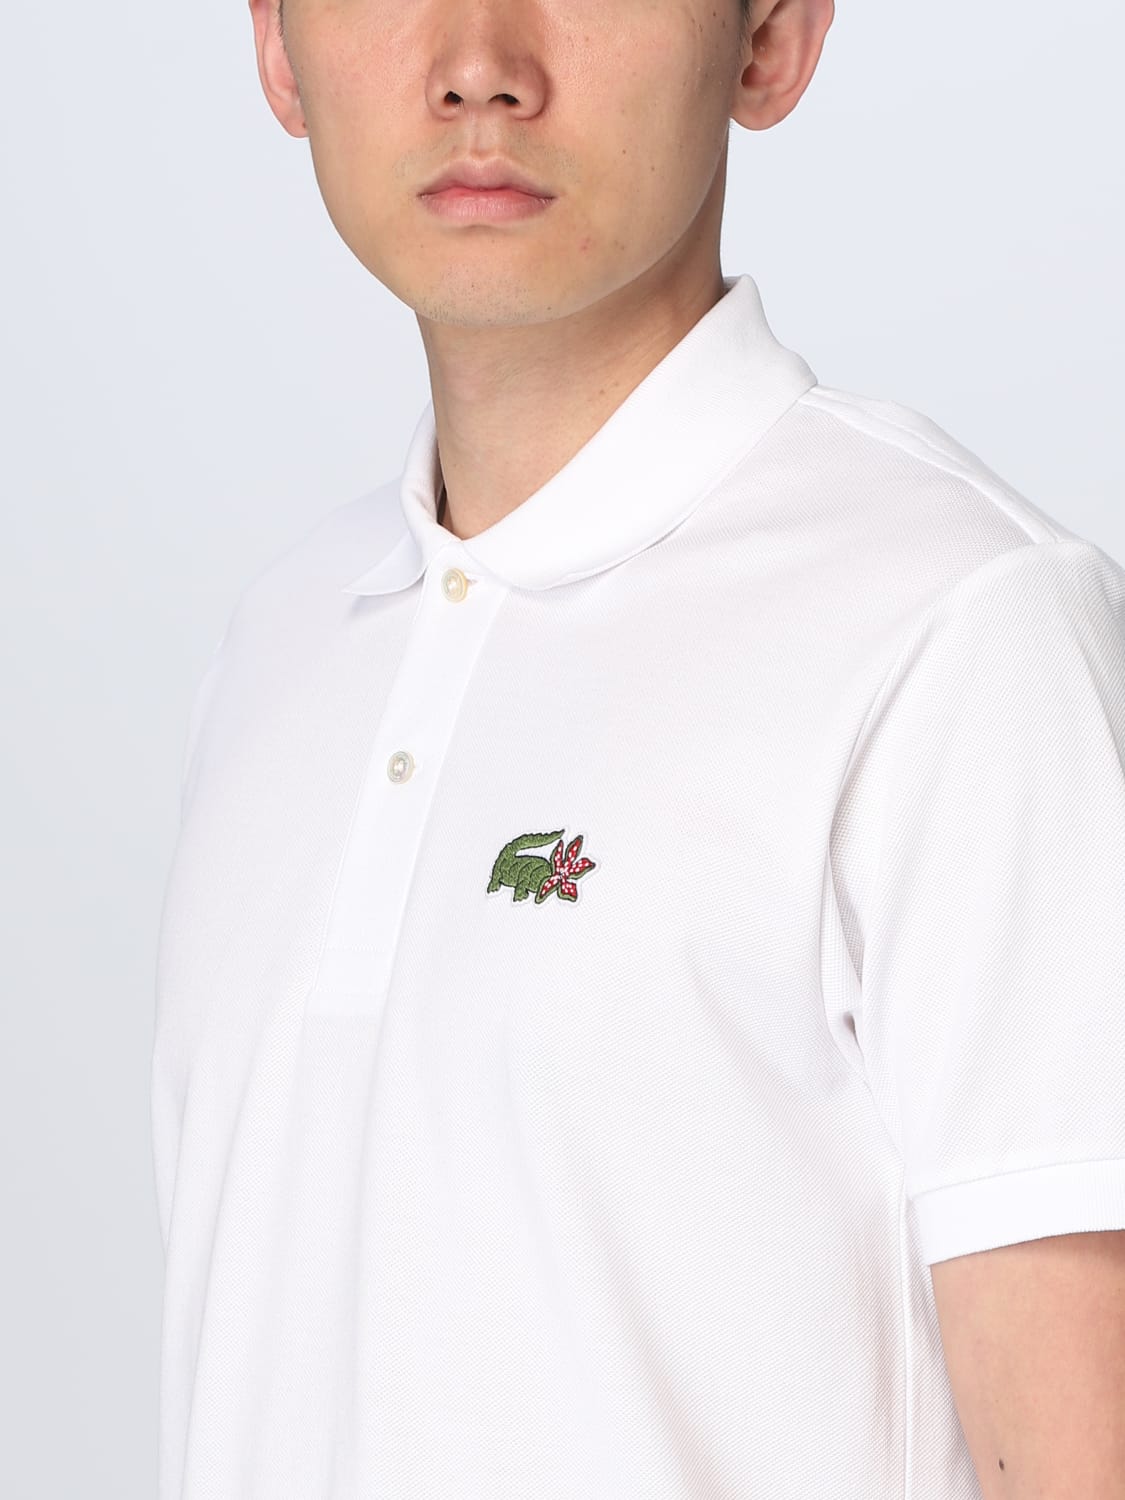 Lacoste Netflix Stranger Things Polo Shirt in Organic Cotton Classic Fit - 6 White